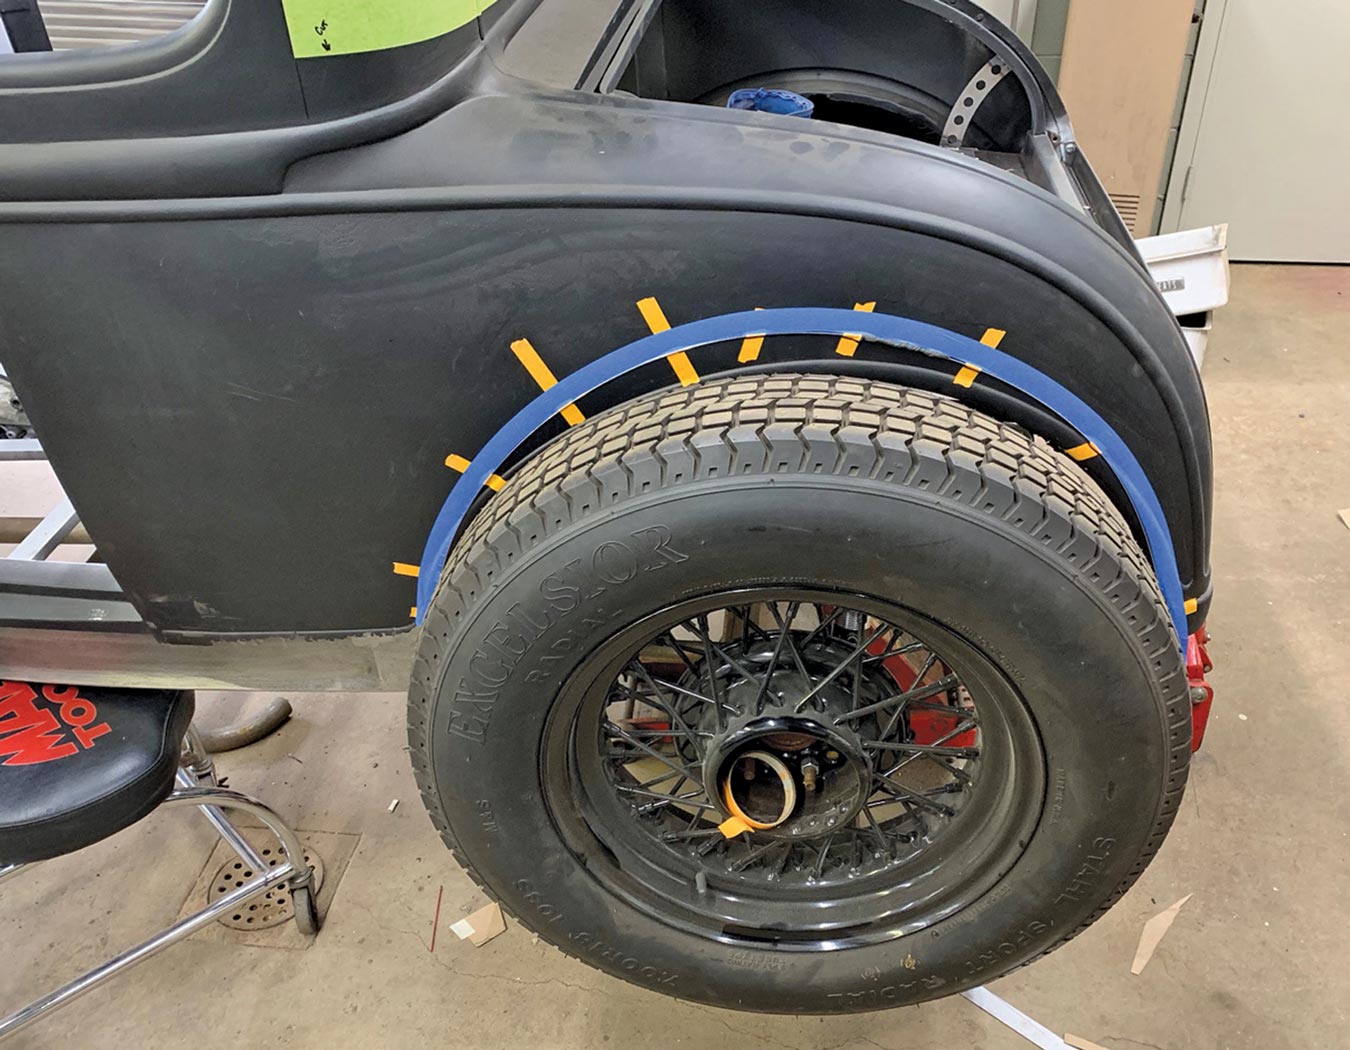 blue and yellow masking tape is used to lay out a line consistent with the curvature of the tire